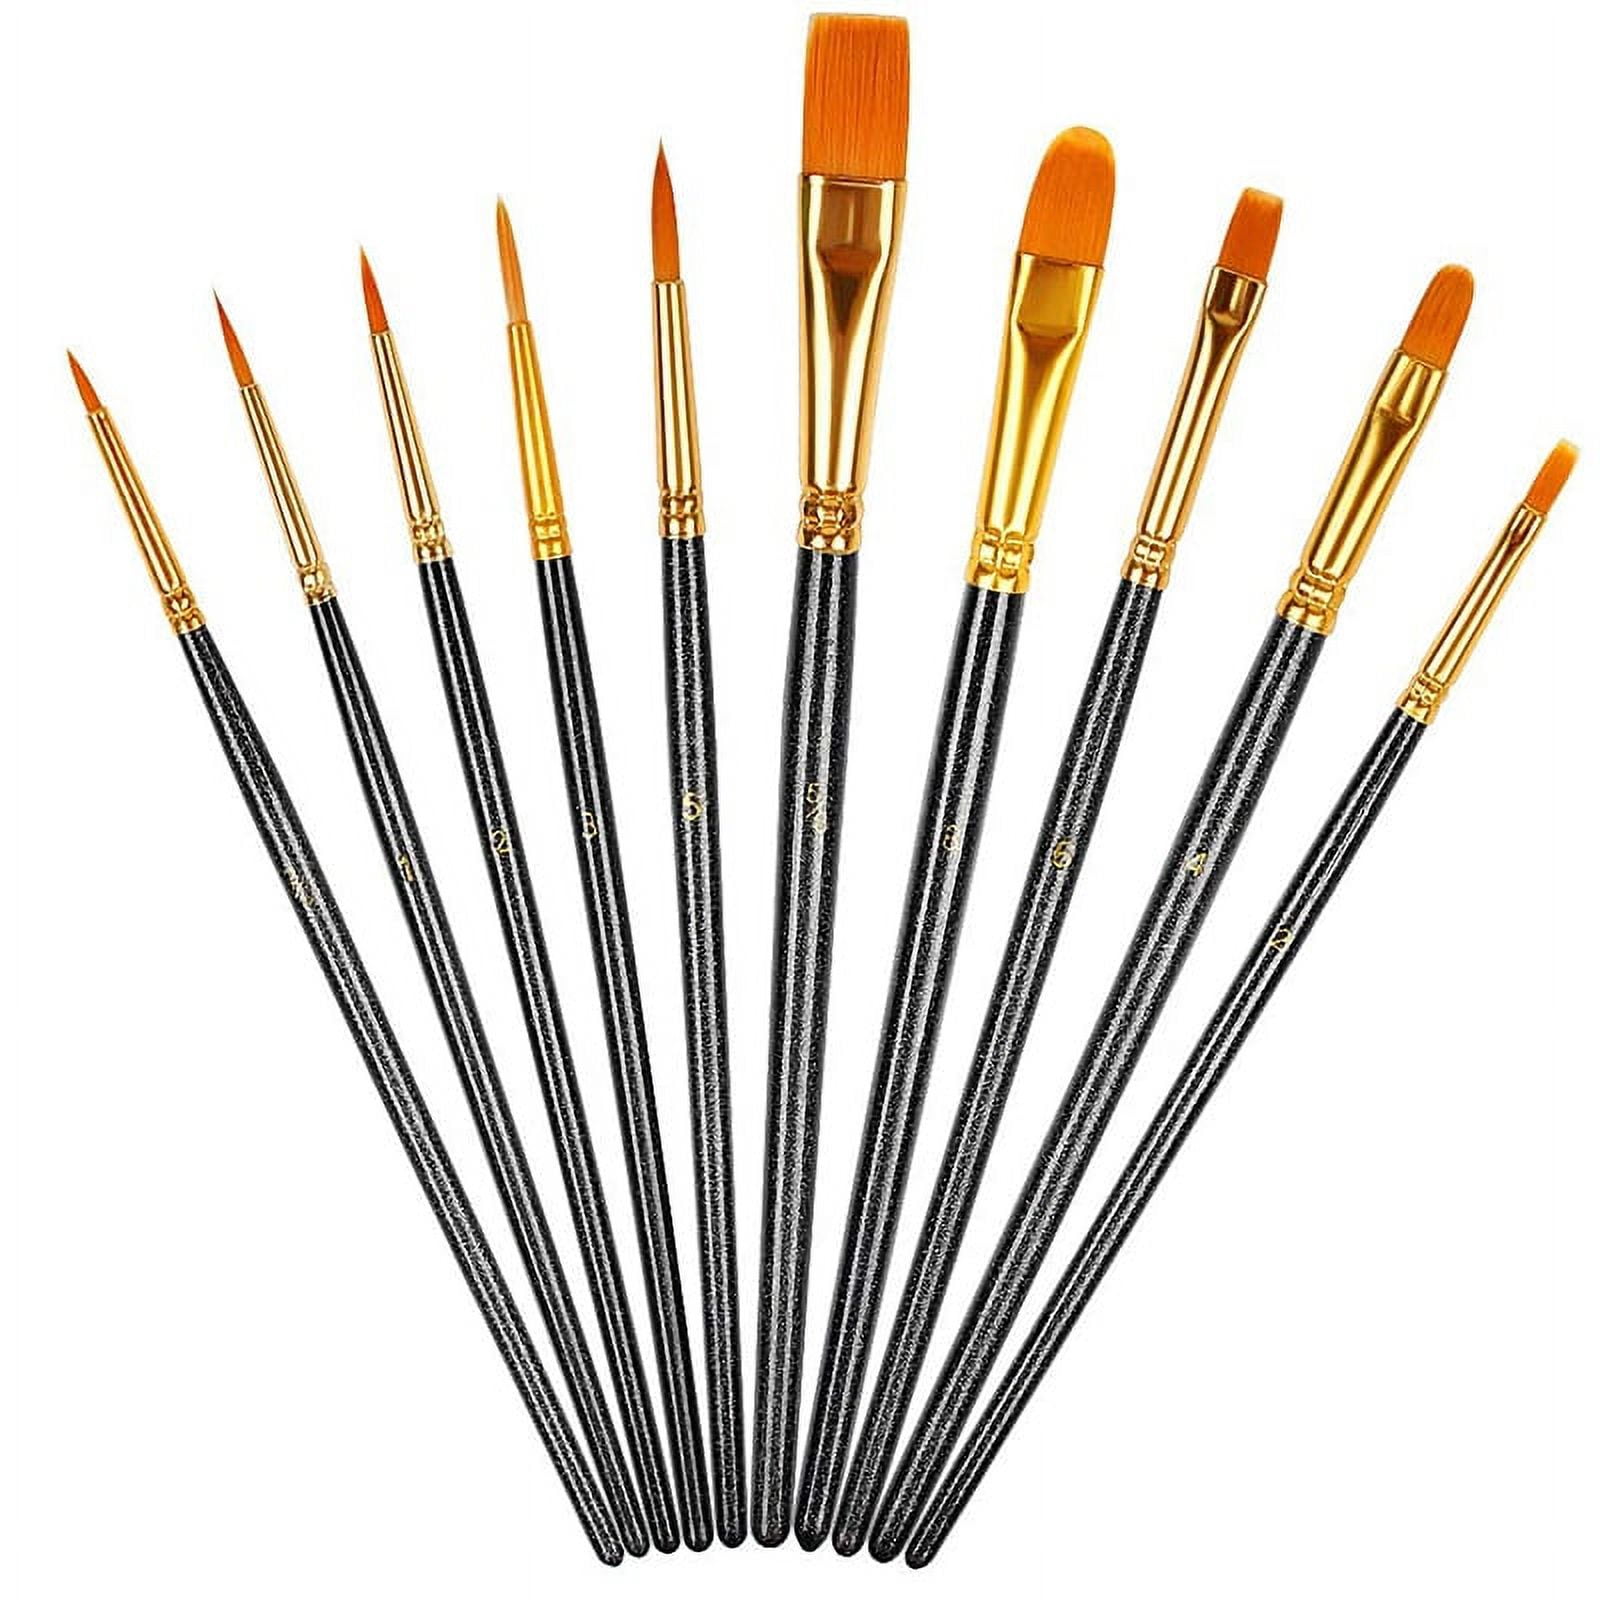 Disposable Paint Brushes for Fine Detail, Nylon Hair Brushes for All, MiniatureSweet, Kawaii Resin Crafts, Decoden Cabochons Supplies